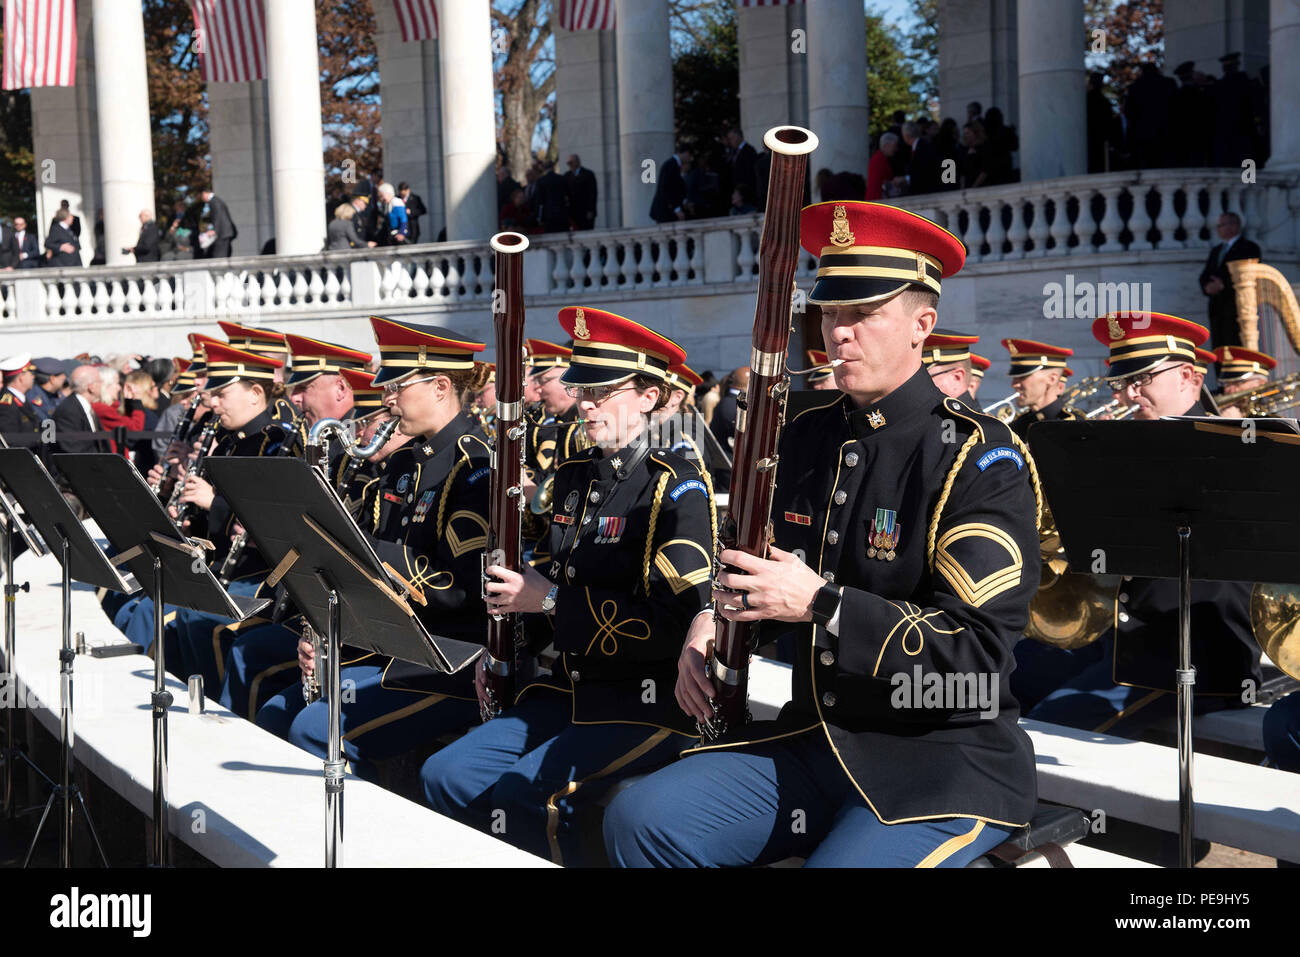 Members of The U.S. Army Band 'Pershing's Own' perform during the National Veterans Day Observance ceremony at the Memorial Amphitheater at Arlington National Cemetery in Arlington, Va., Nov. 11. (Photo by Spc. Brandon C. Dyer) Stock Photo